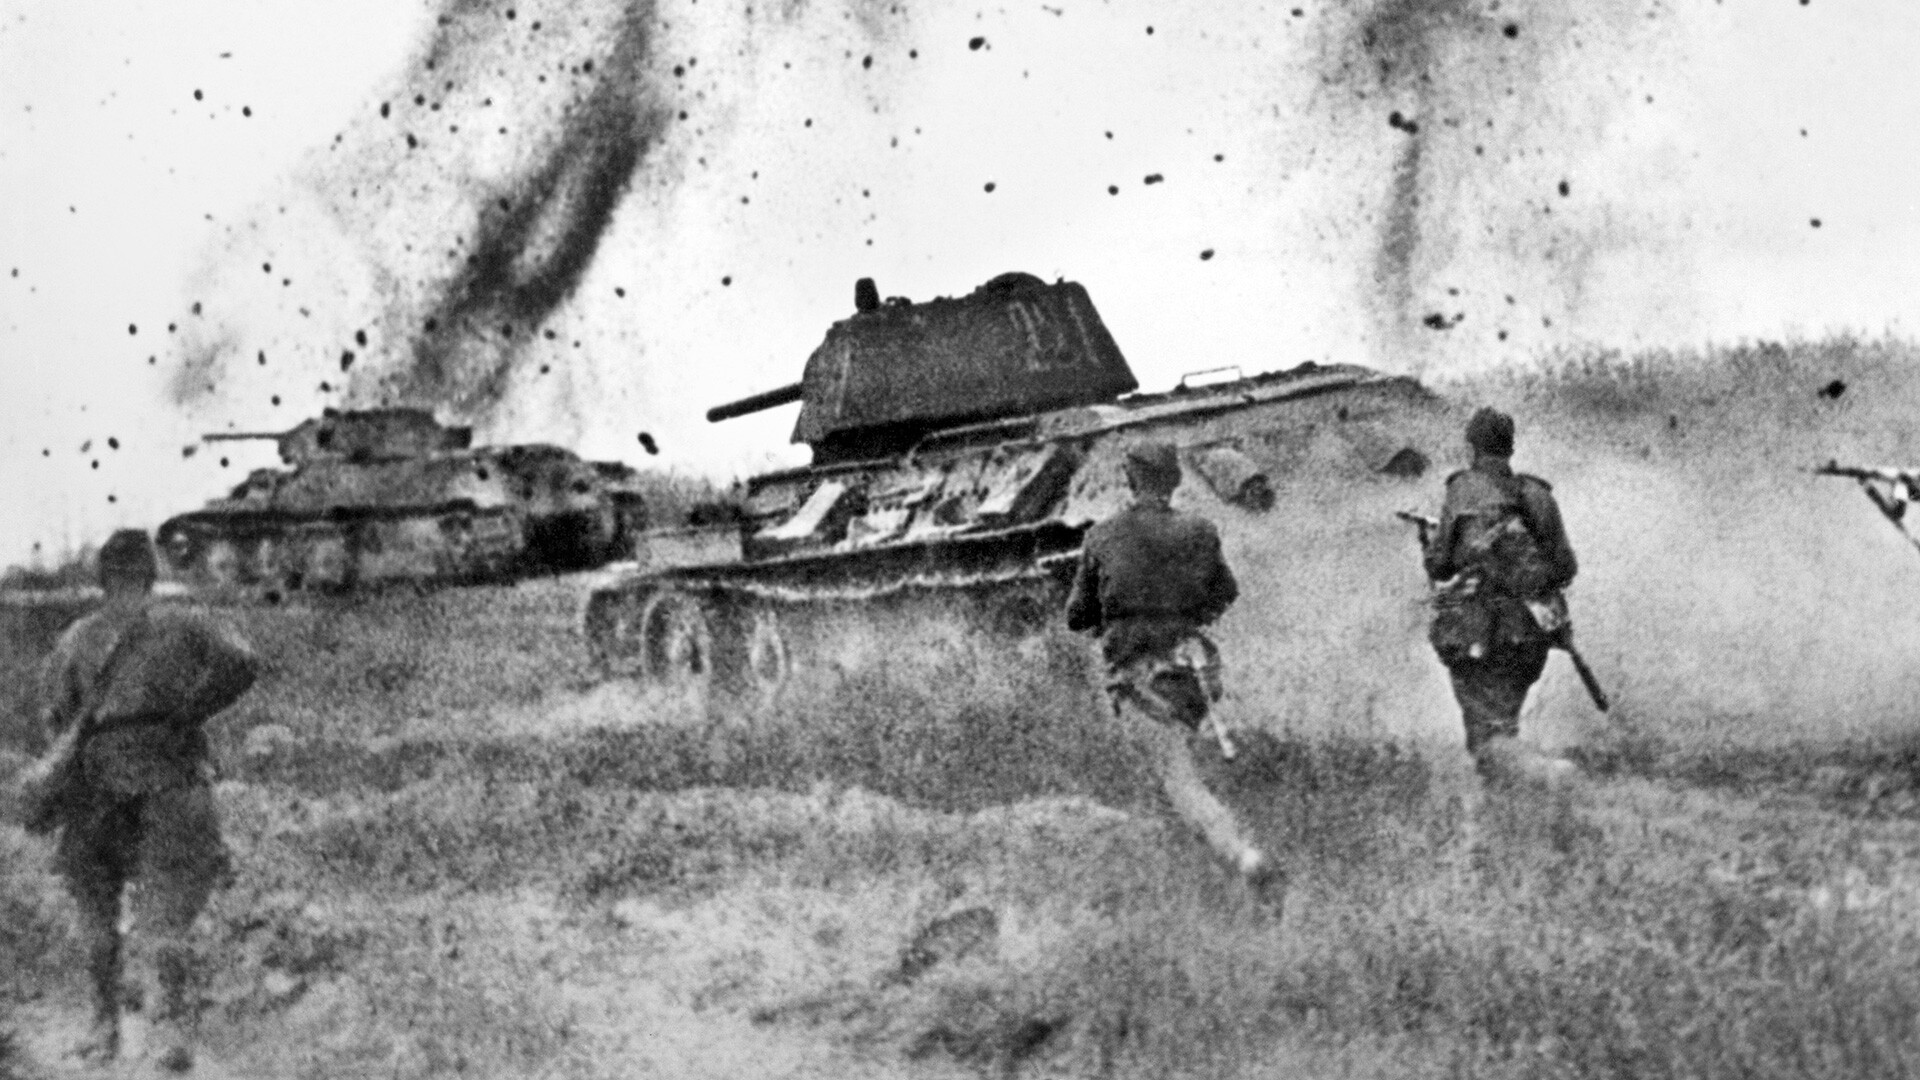 Attack of the units of the 5th Tank Army near Prokhorovka.